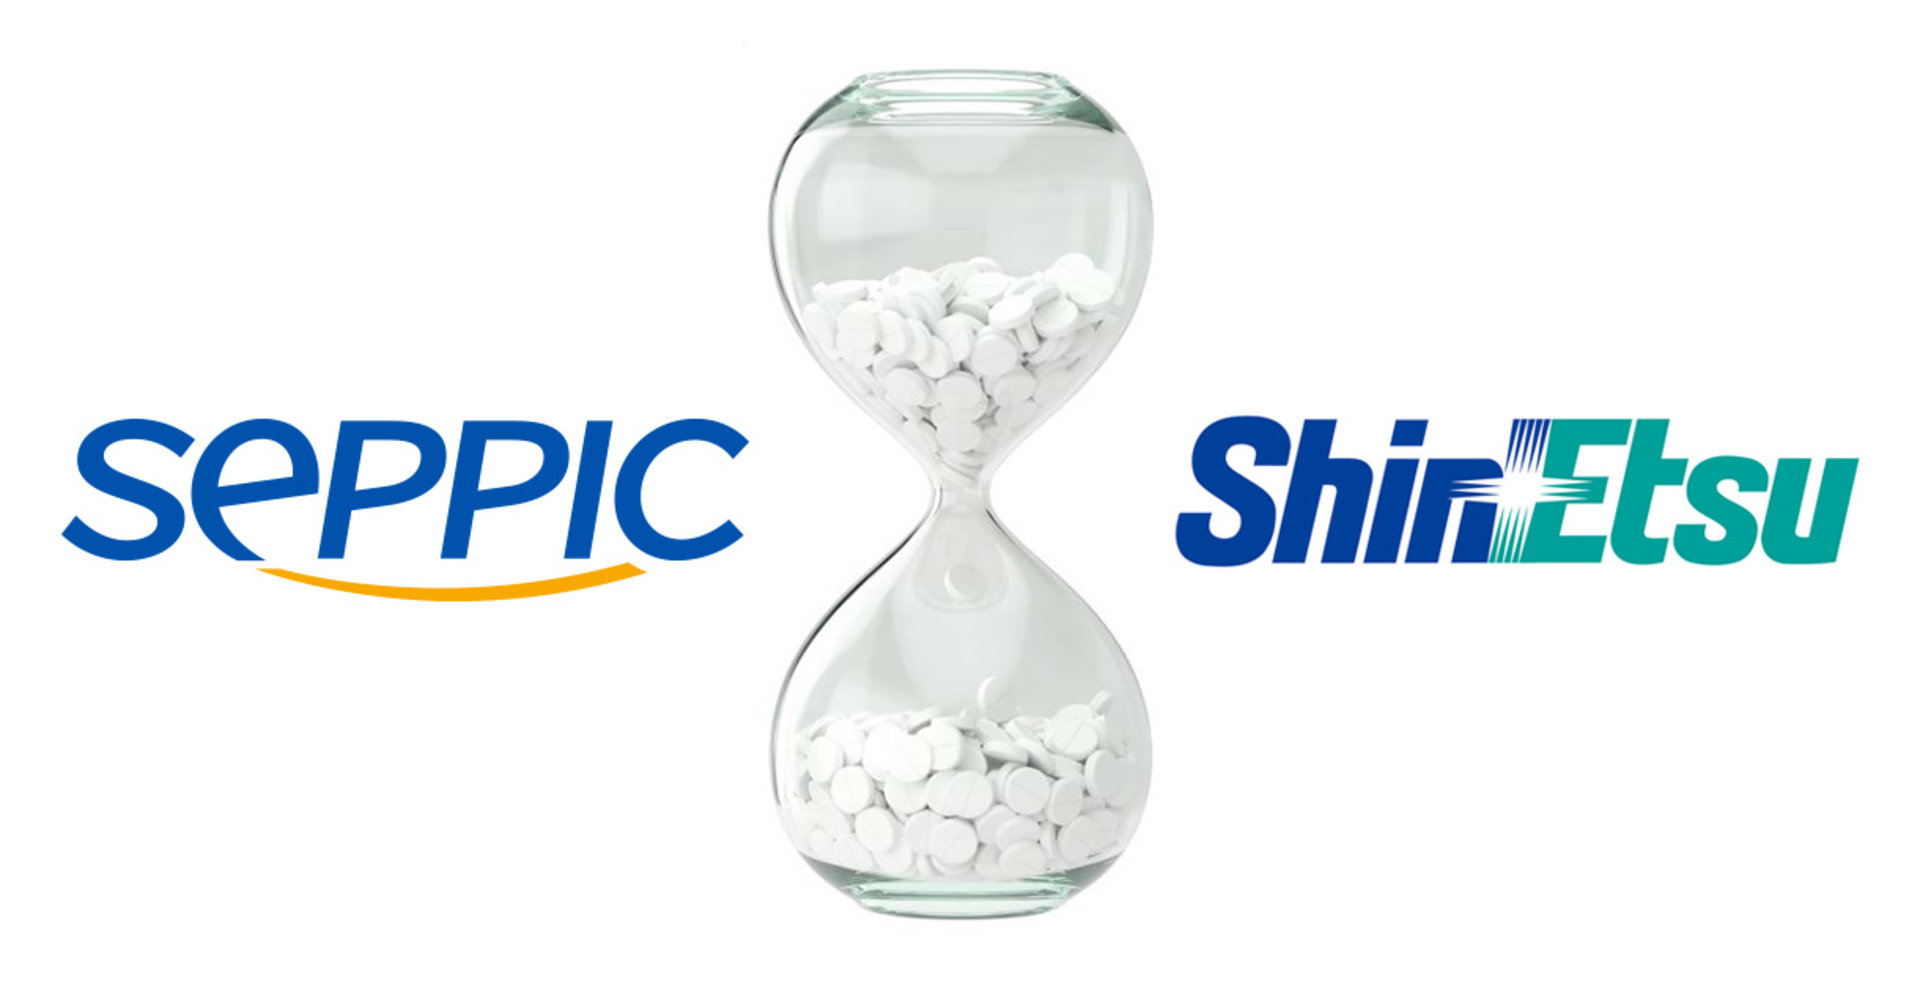 Webinar Seppic & Shin-Etsu “Quality by design in hydrophilic matrices formulation” 8th June 2021